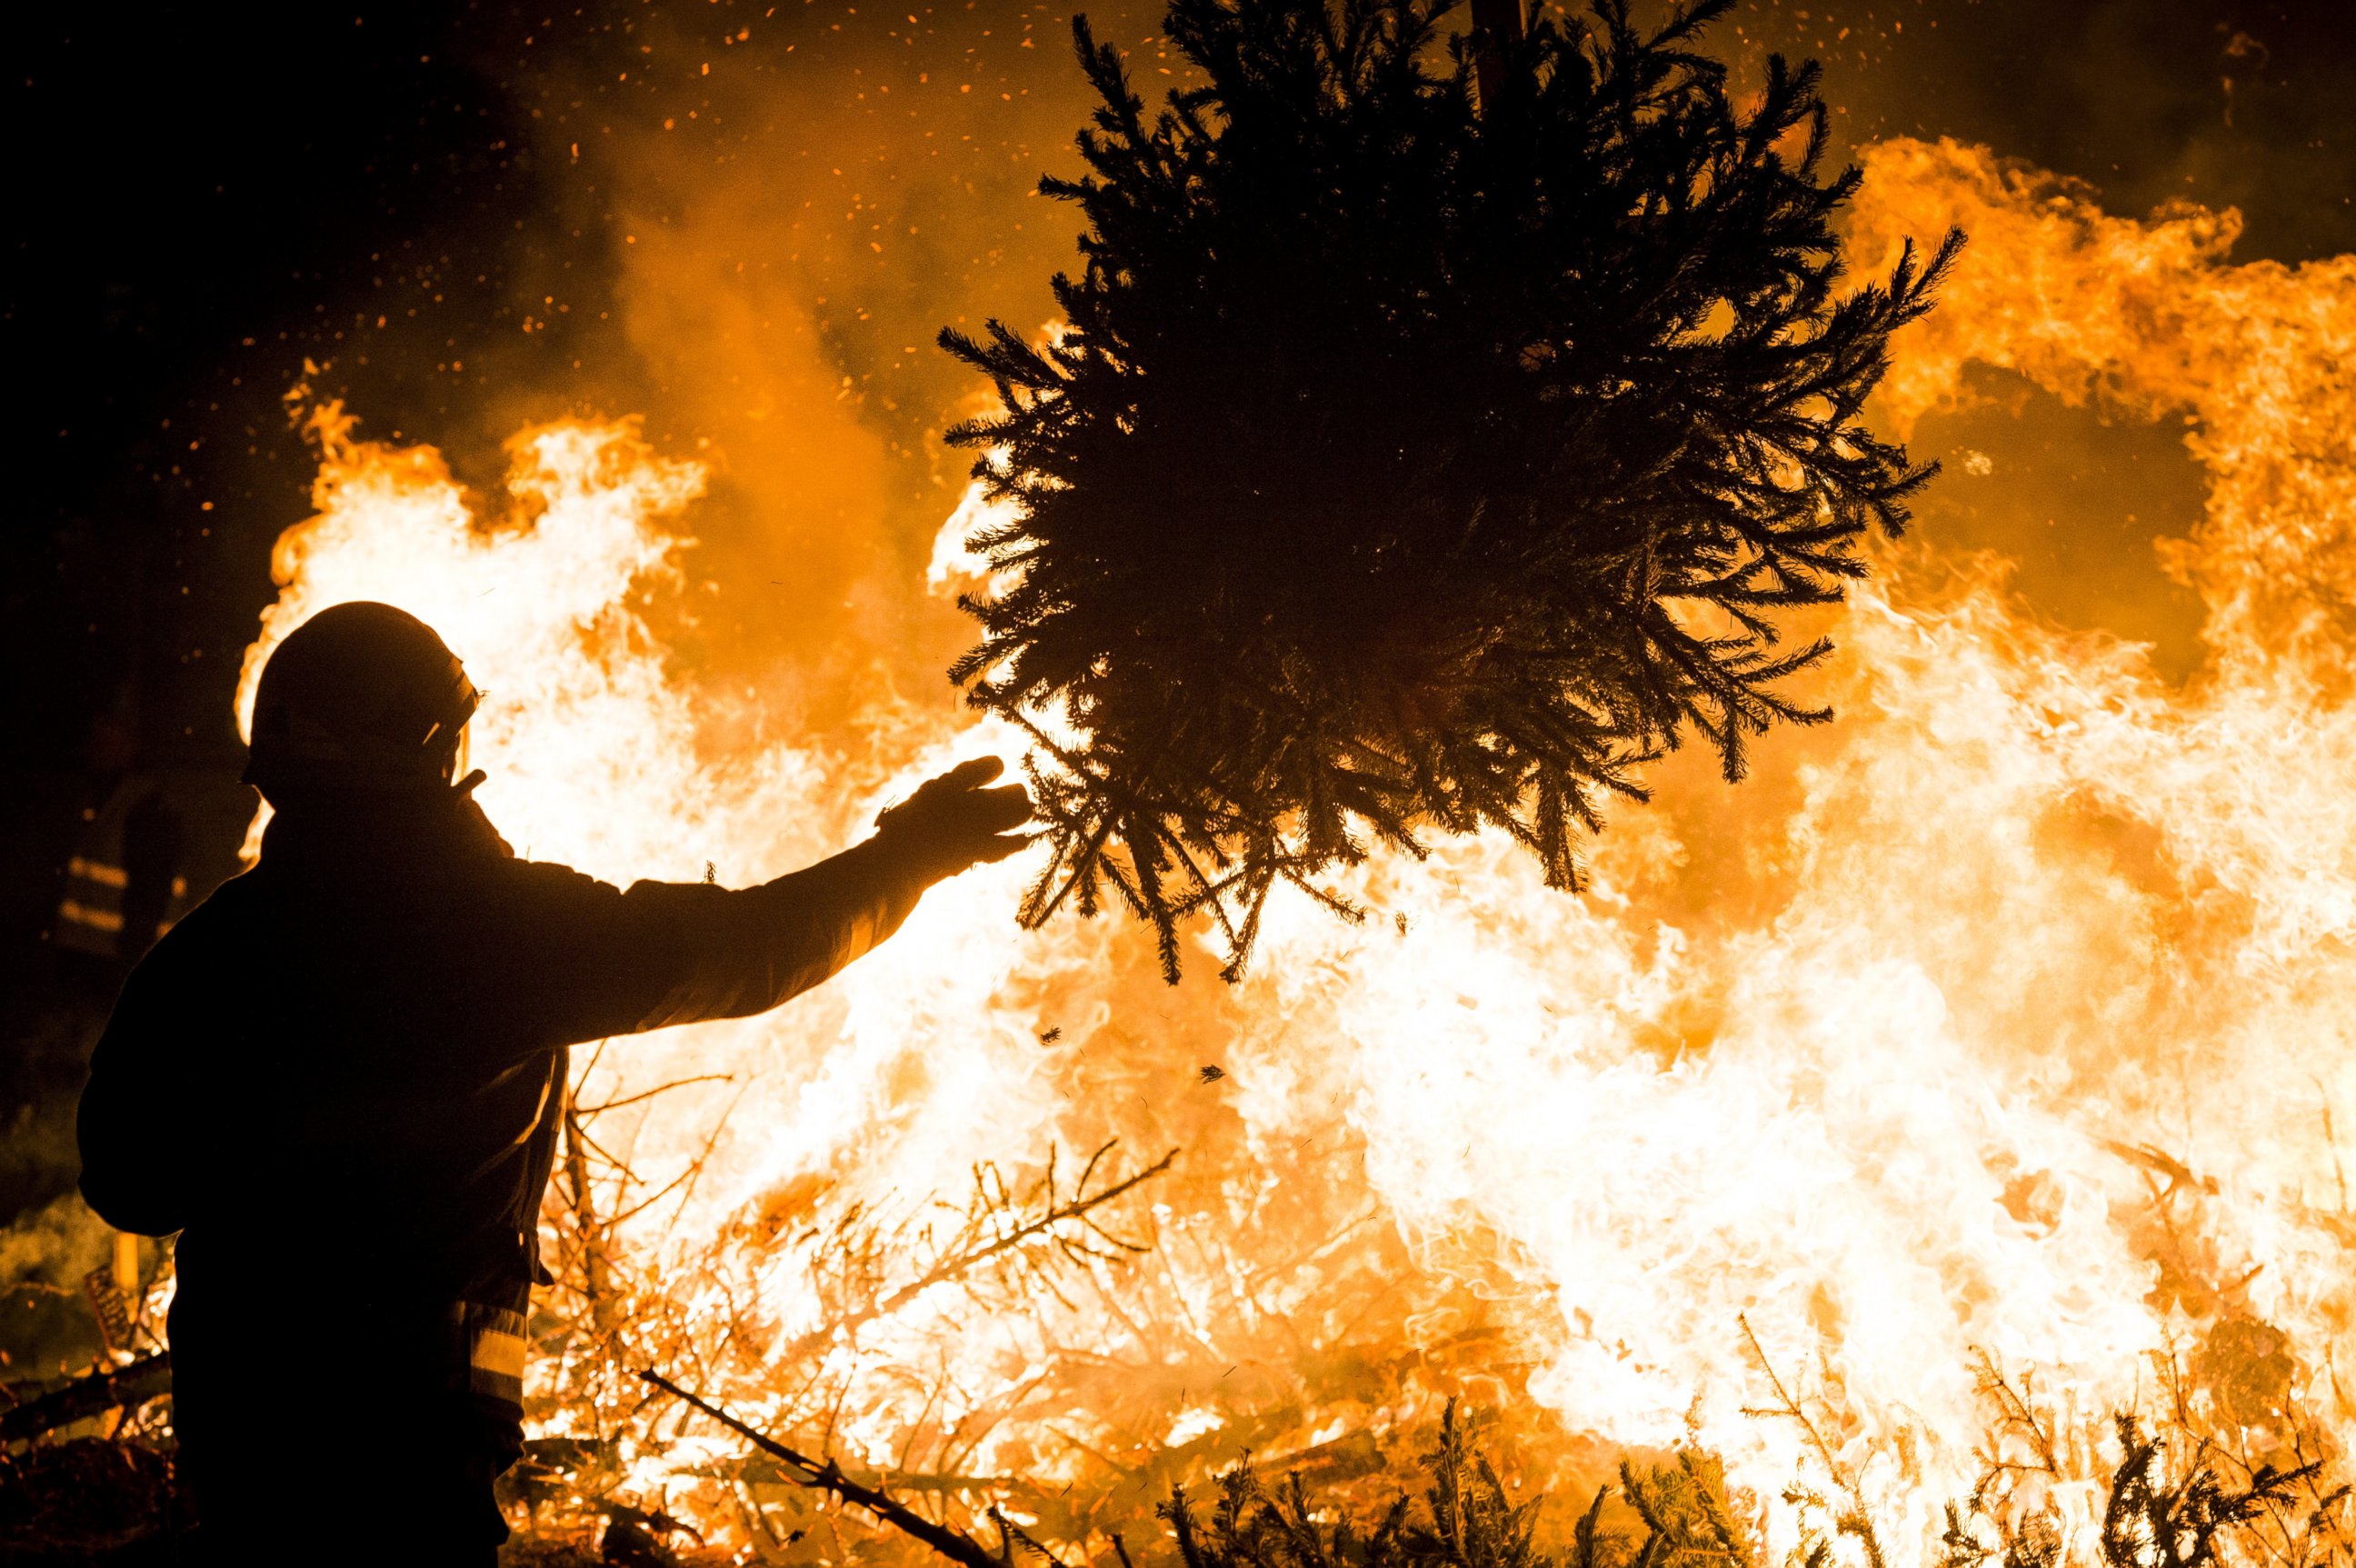 PHOTO: A man throws a tree on a burning pile of trees at the Museumplein, Amsterdam, on Jan. 5, 2014, during an annual ceremony of Christmas trees' burning.   